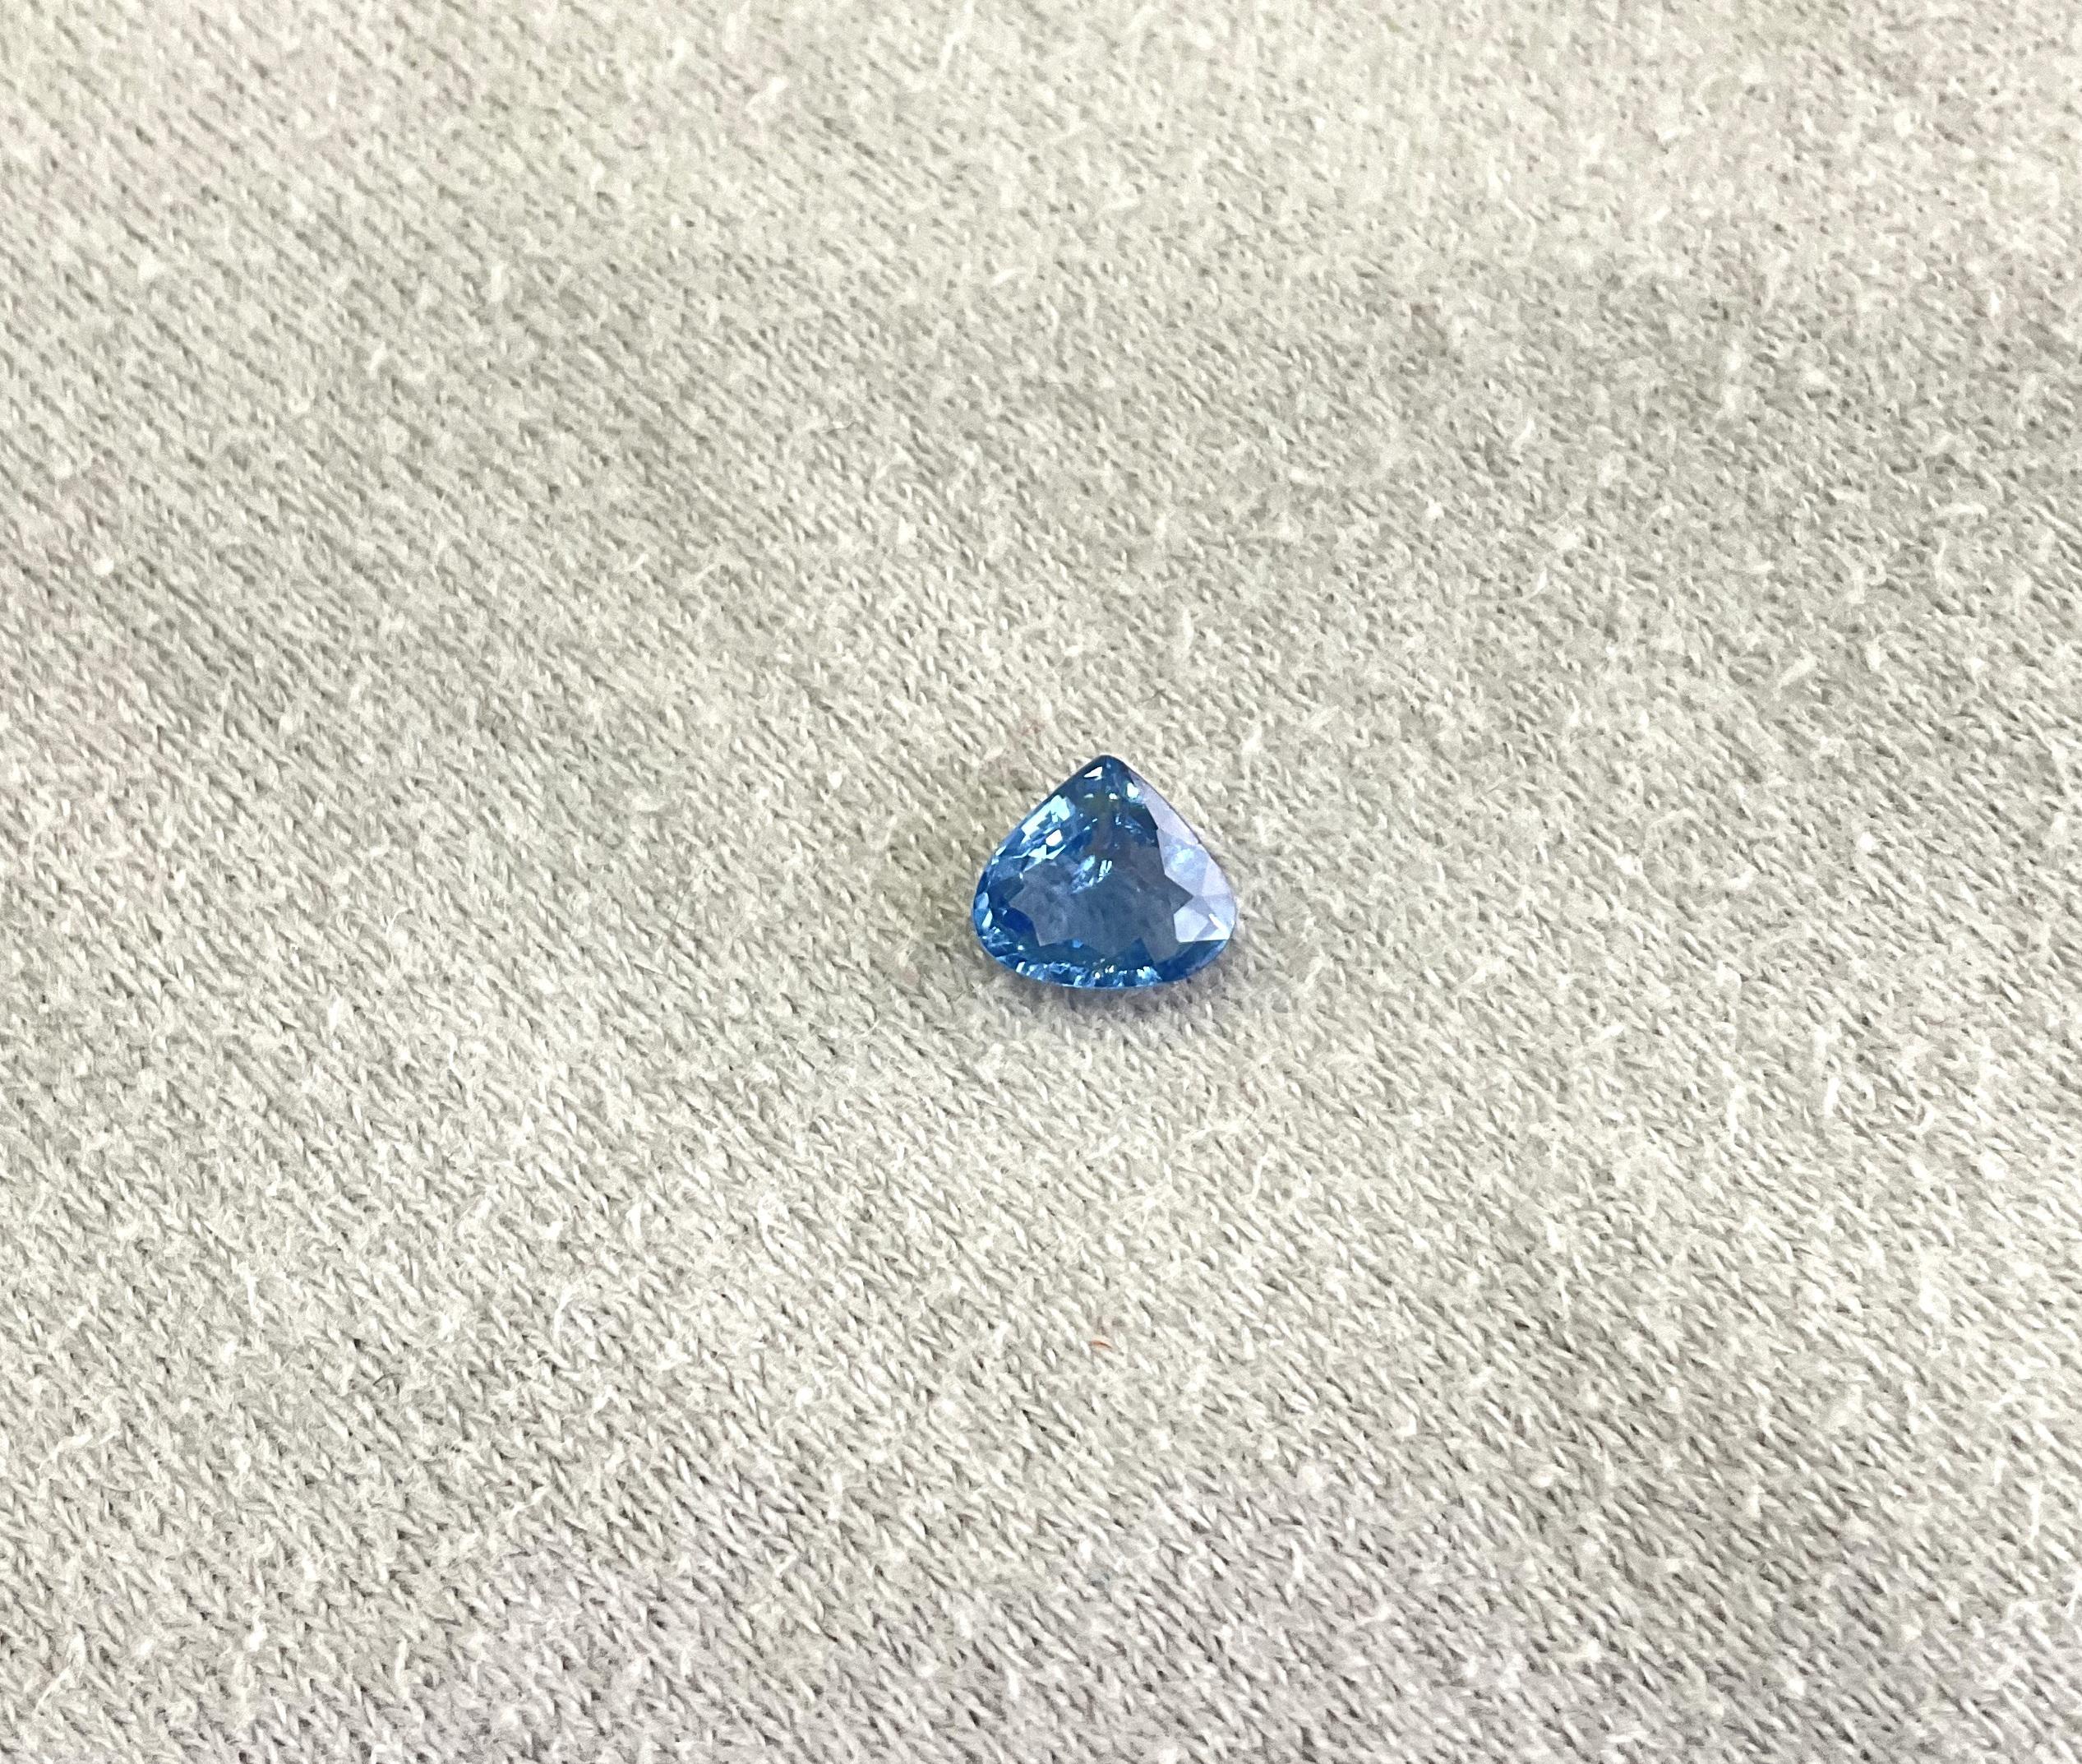 Tanzania Blue Spinel Heart Faceted Natural Cut Stone for Jewelry
Weight - 0.93 Ct
Size - 6x3 mm
Shape - Heart
Quantity - 1 Piece